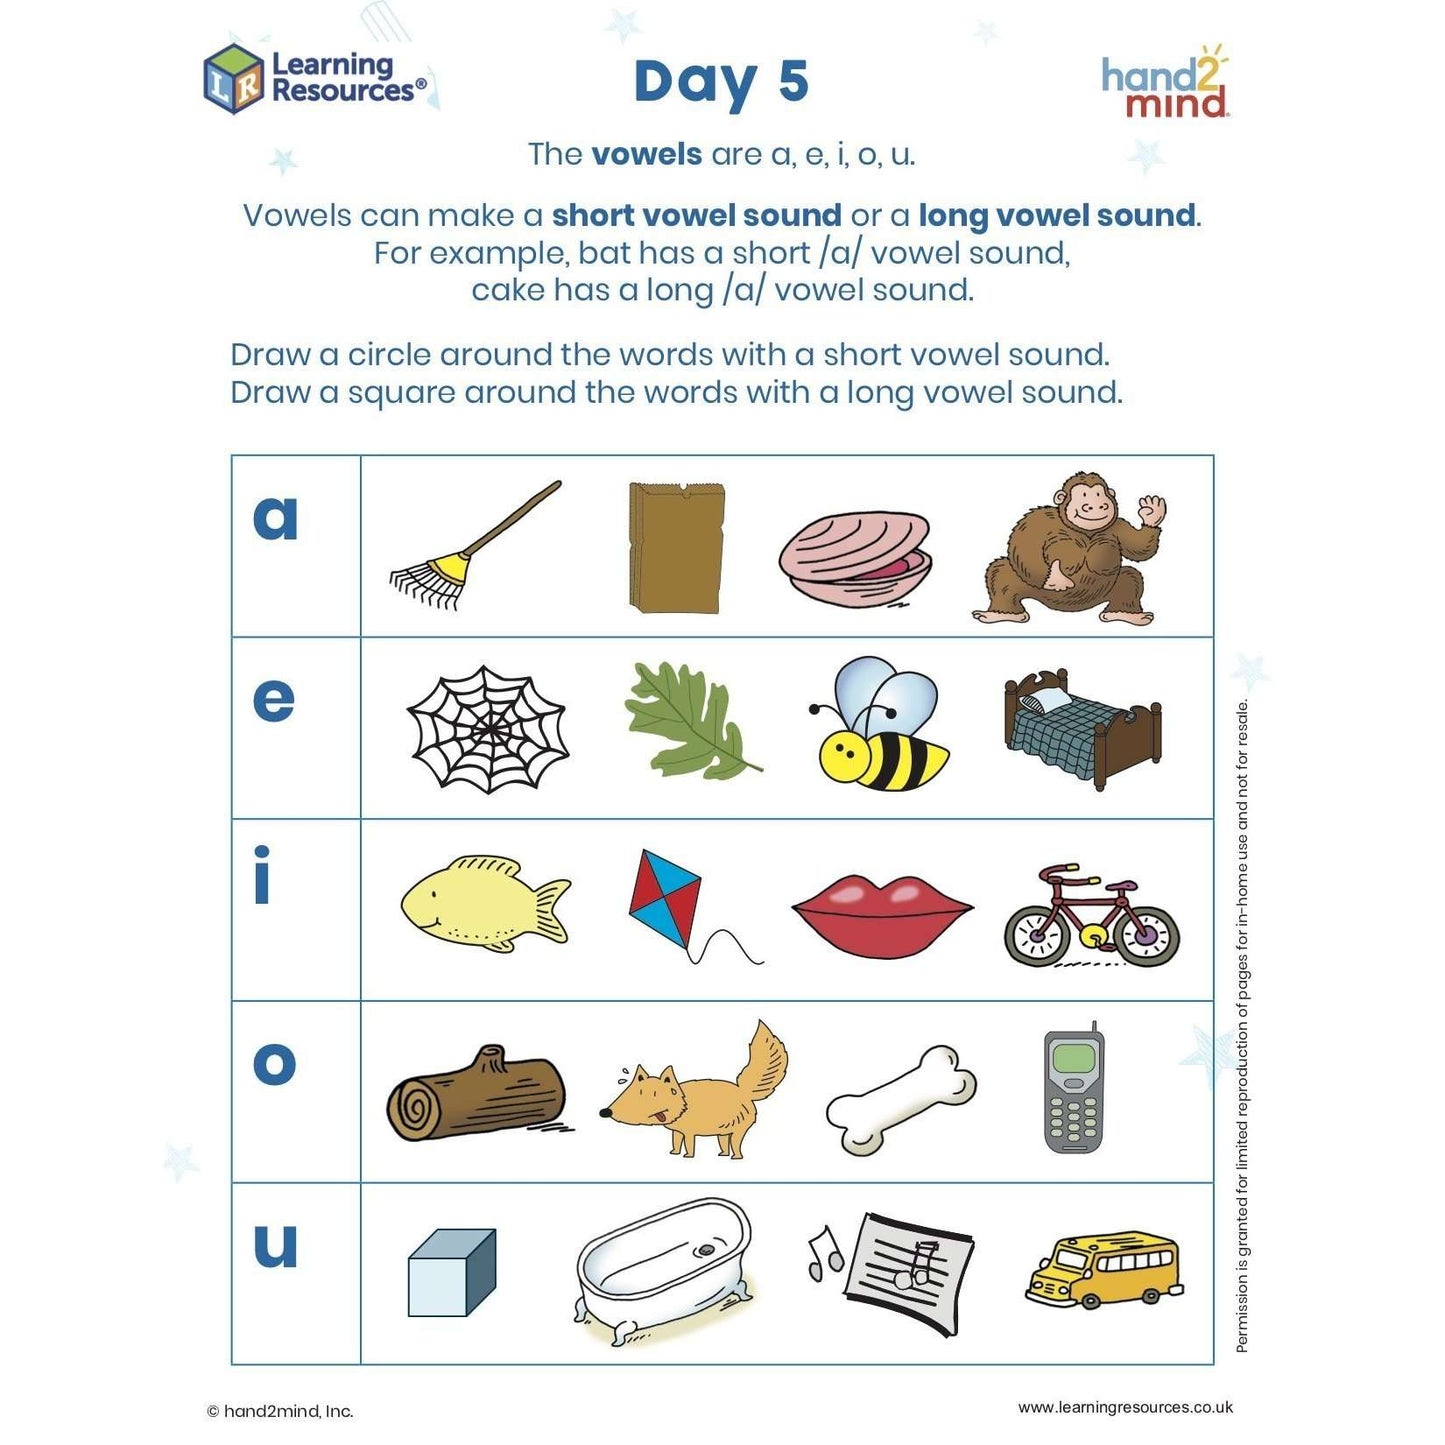 English Activity Book - KS1 (6/7 years):Primary Classroom Resources